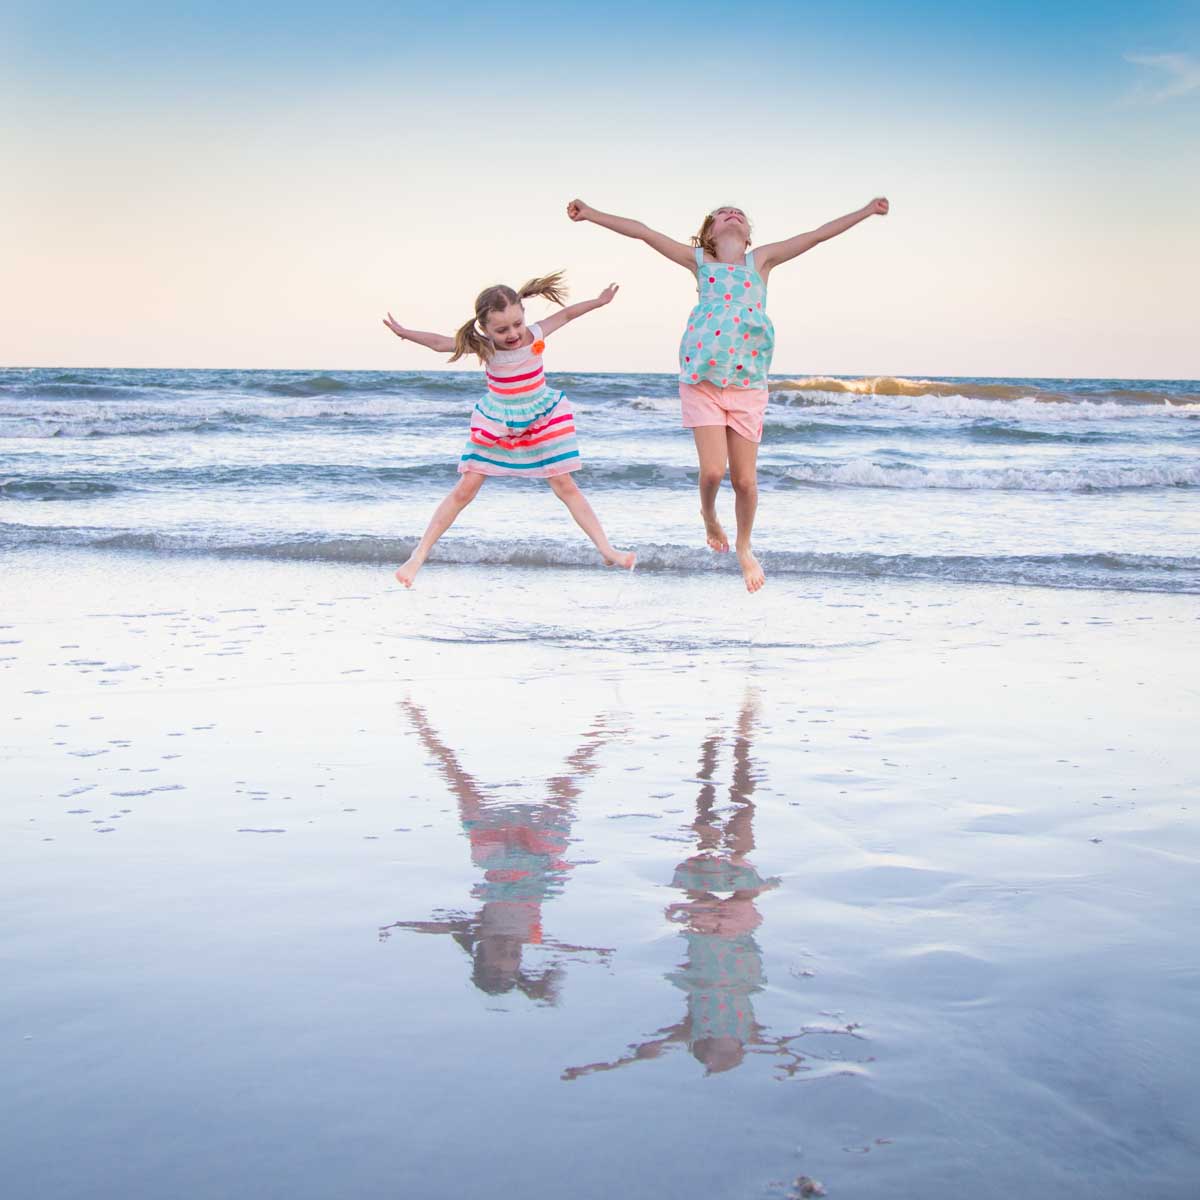 Two young girls are having fun jumping at the beach.